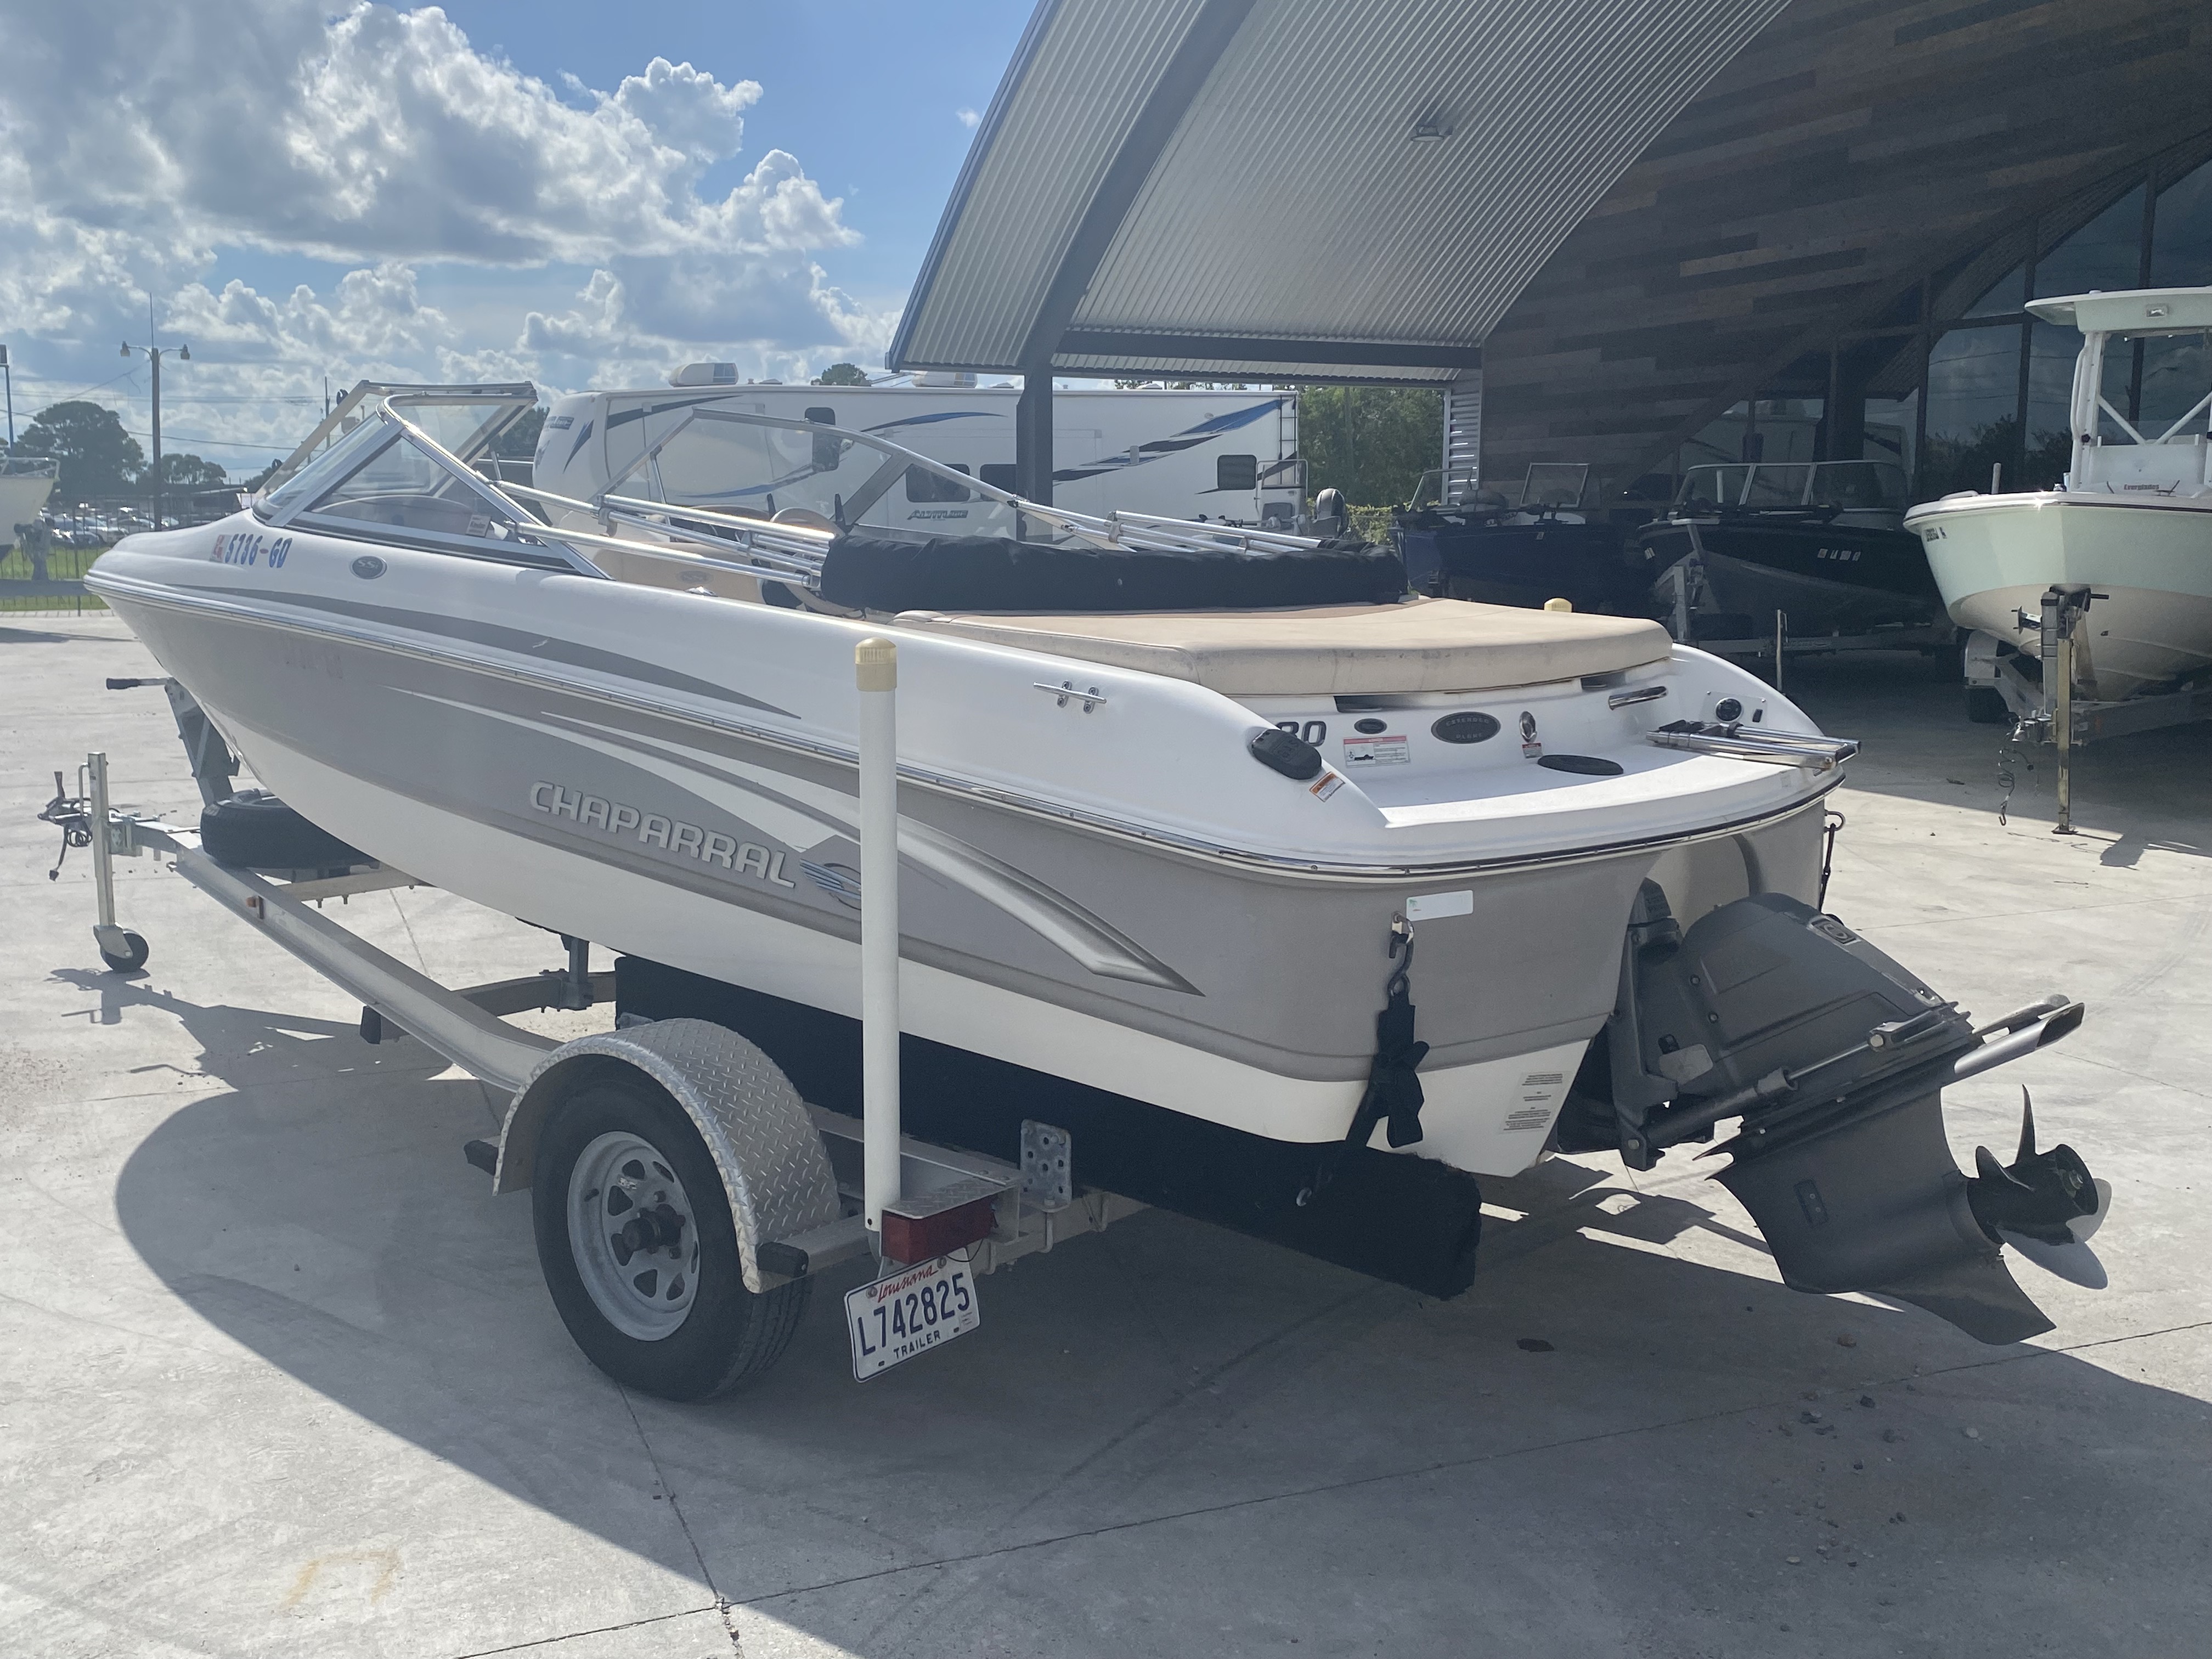 2008 Chaparral boat for sale, model of the boat is 180 SSi & Image # 9 of 10